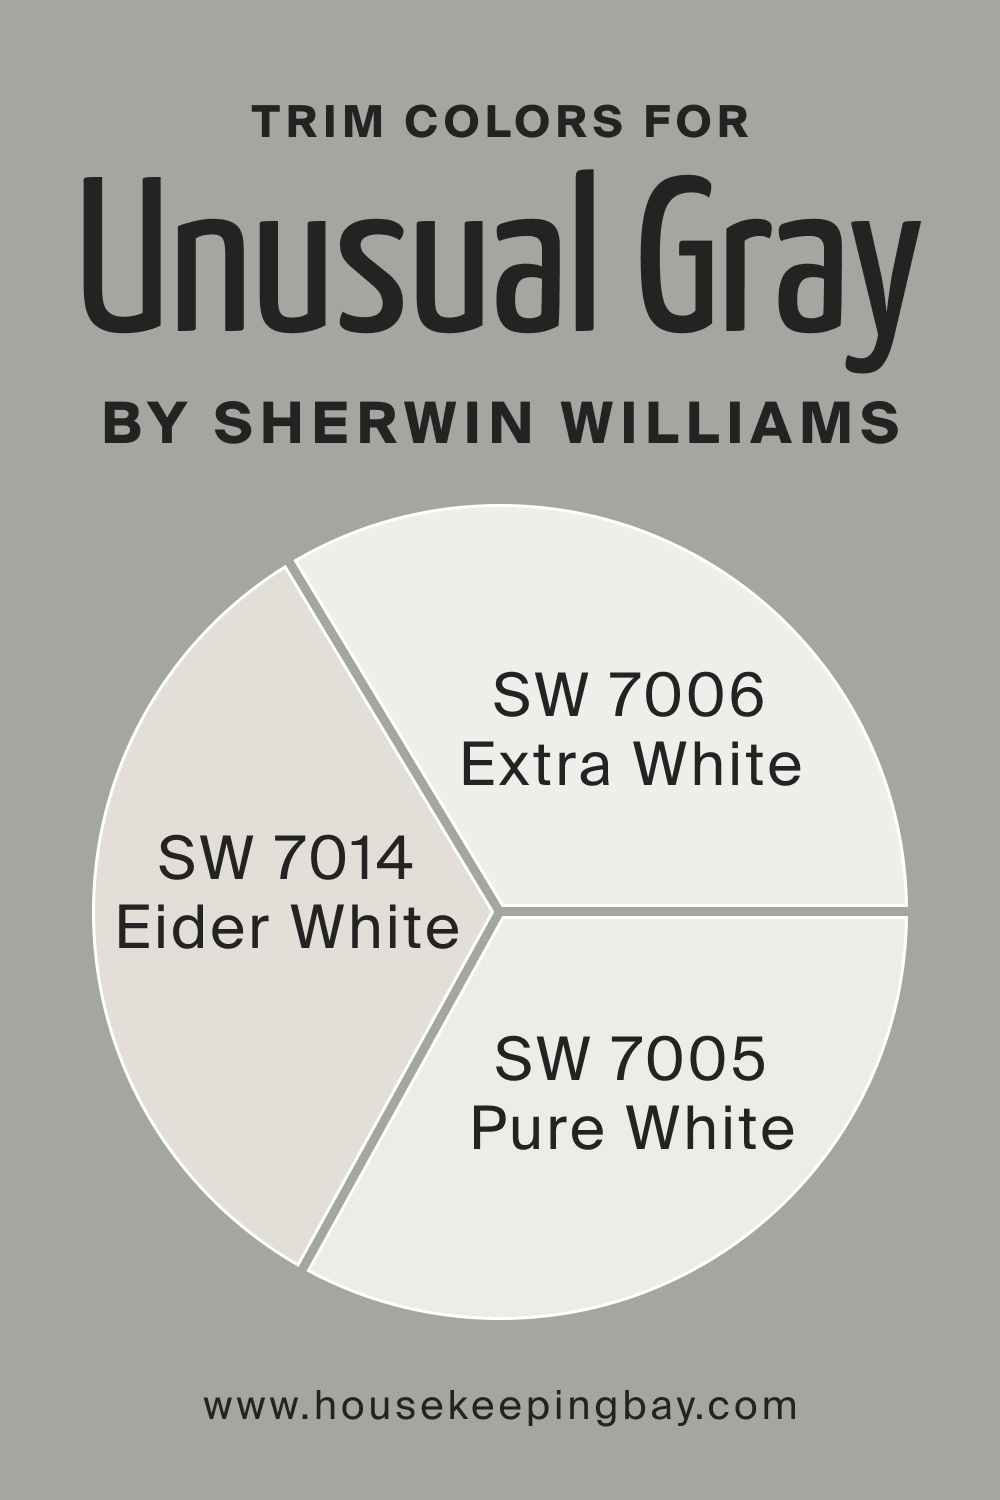 Trim Colors of SW 7059 Unusual Gray by Sherwin Williams